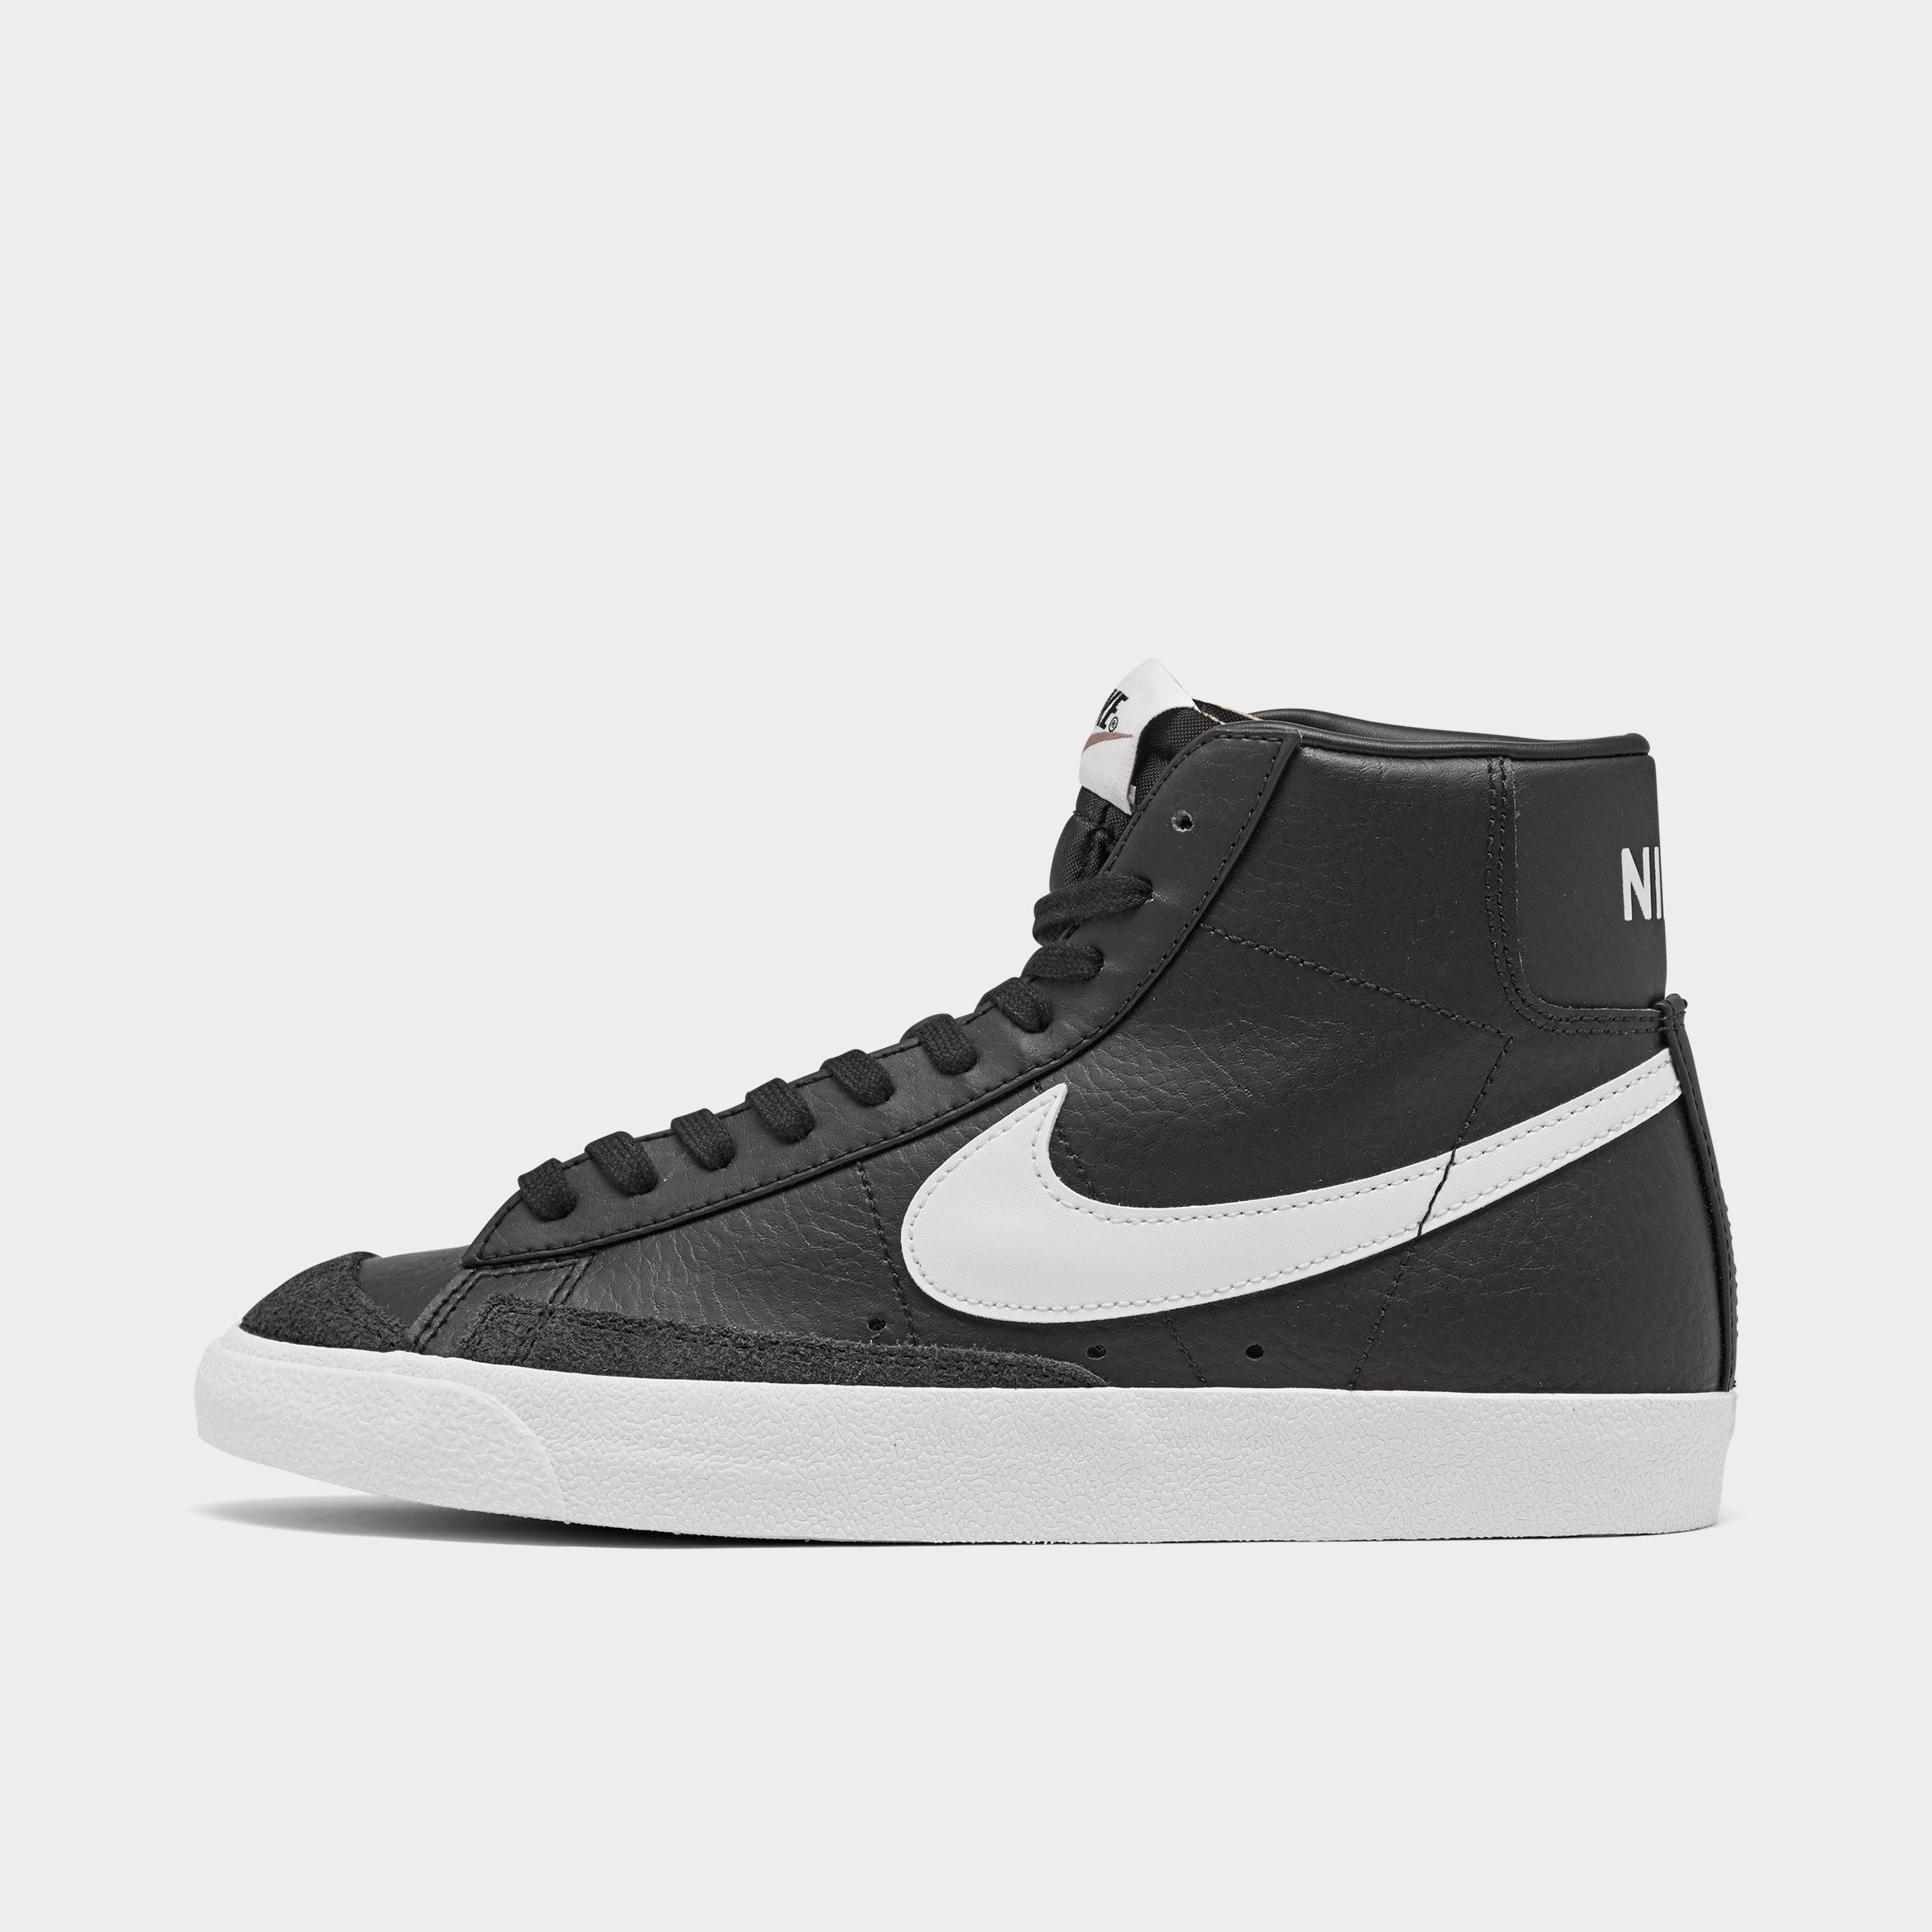 Nike Men's Blazer Mid 77 Vintage-Inspired Casual Sneakers from Finish Line